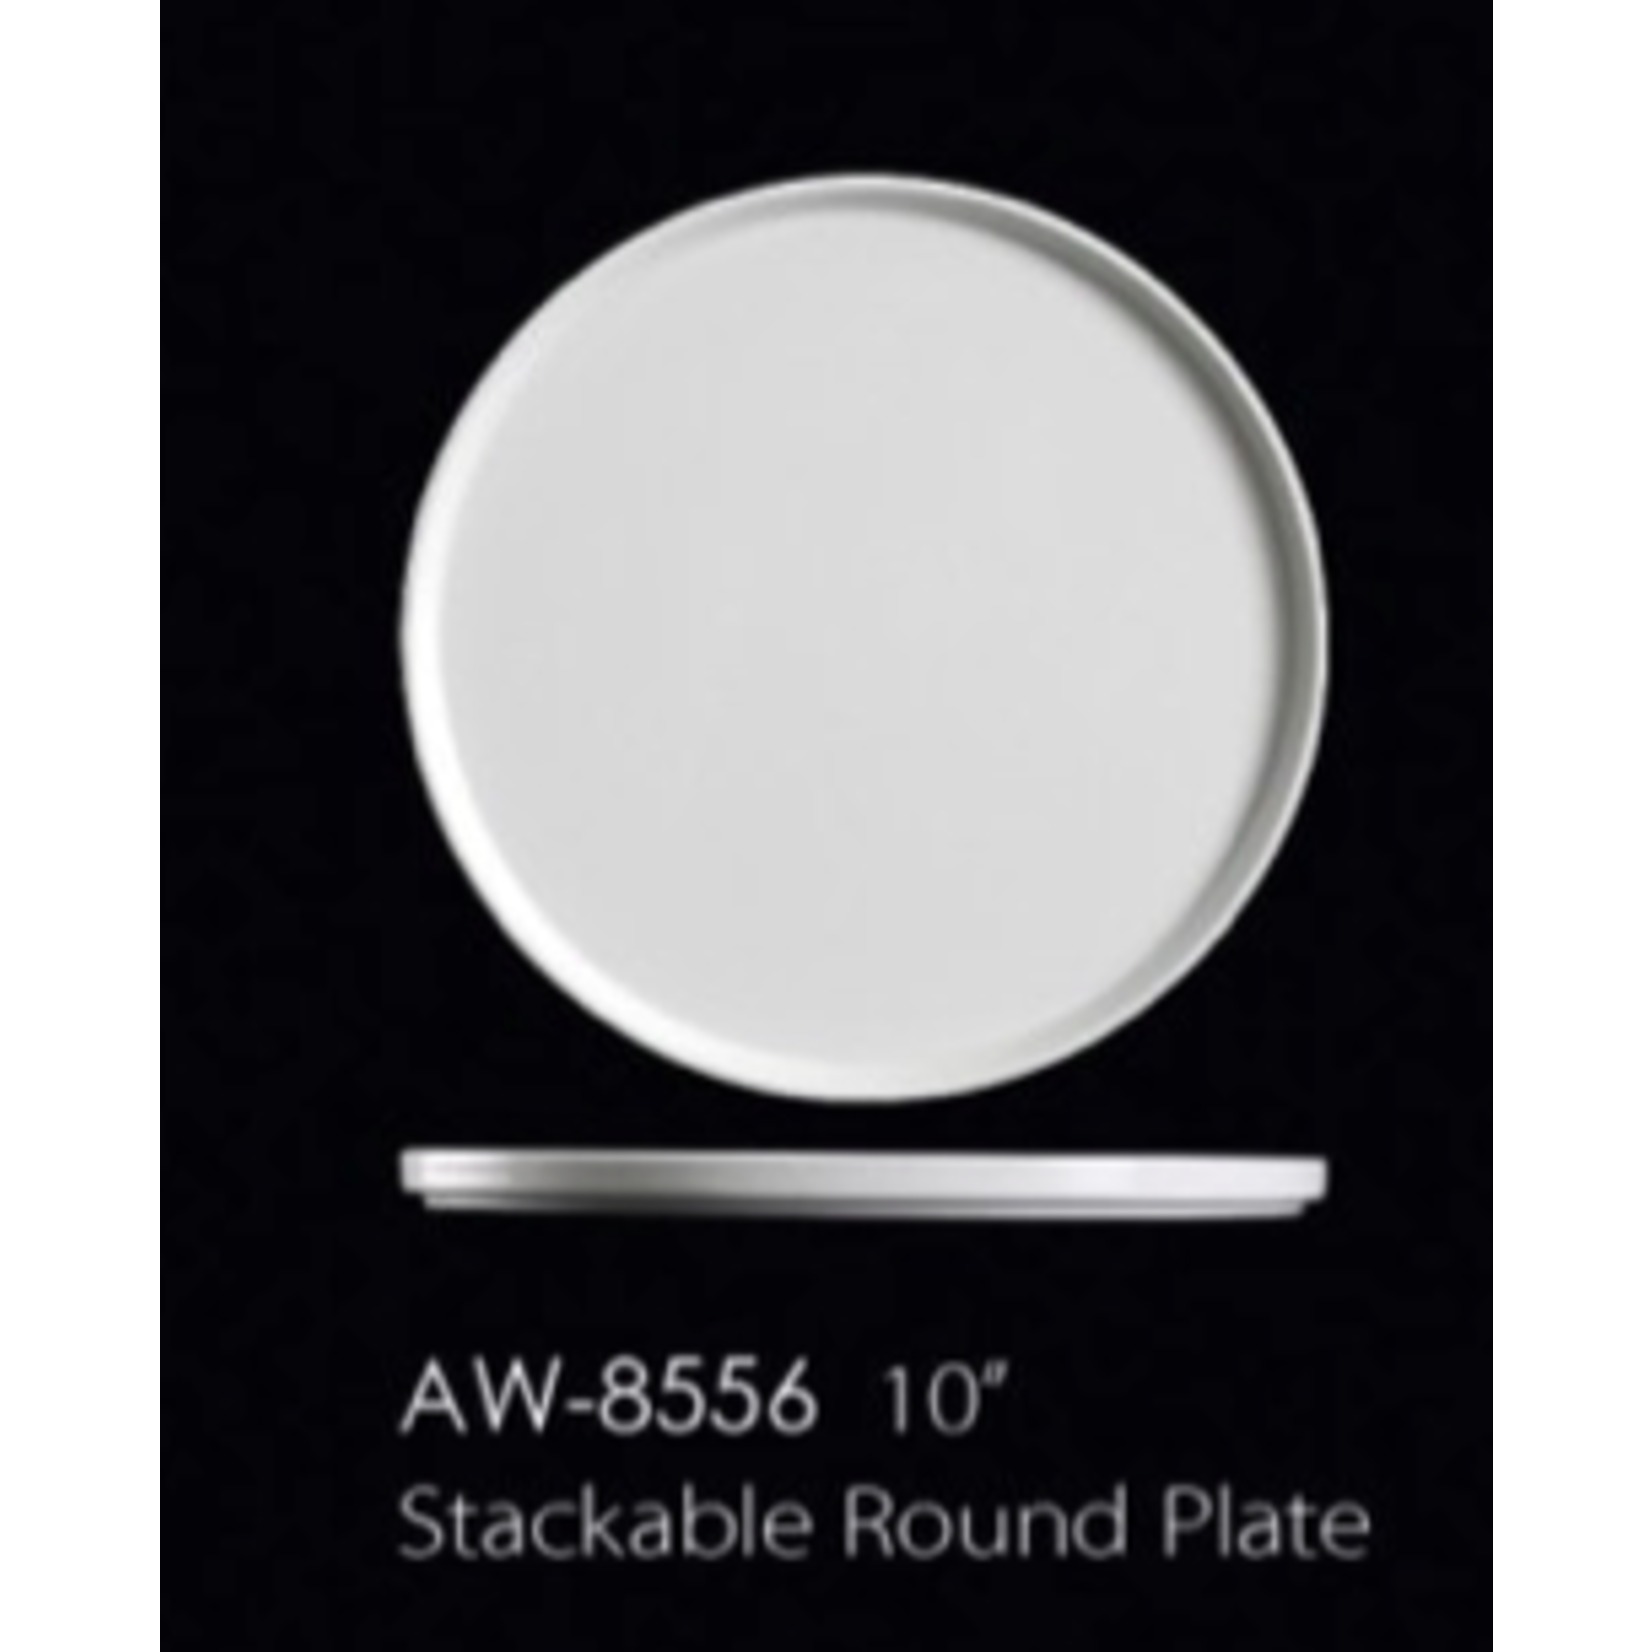 Palate and Plate Aw-8556 10” Stackable Round Plate 12/cs